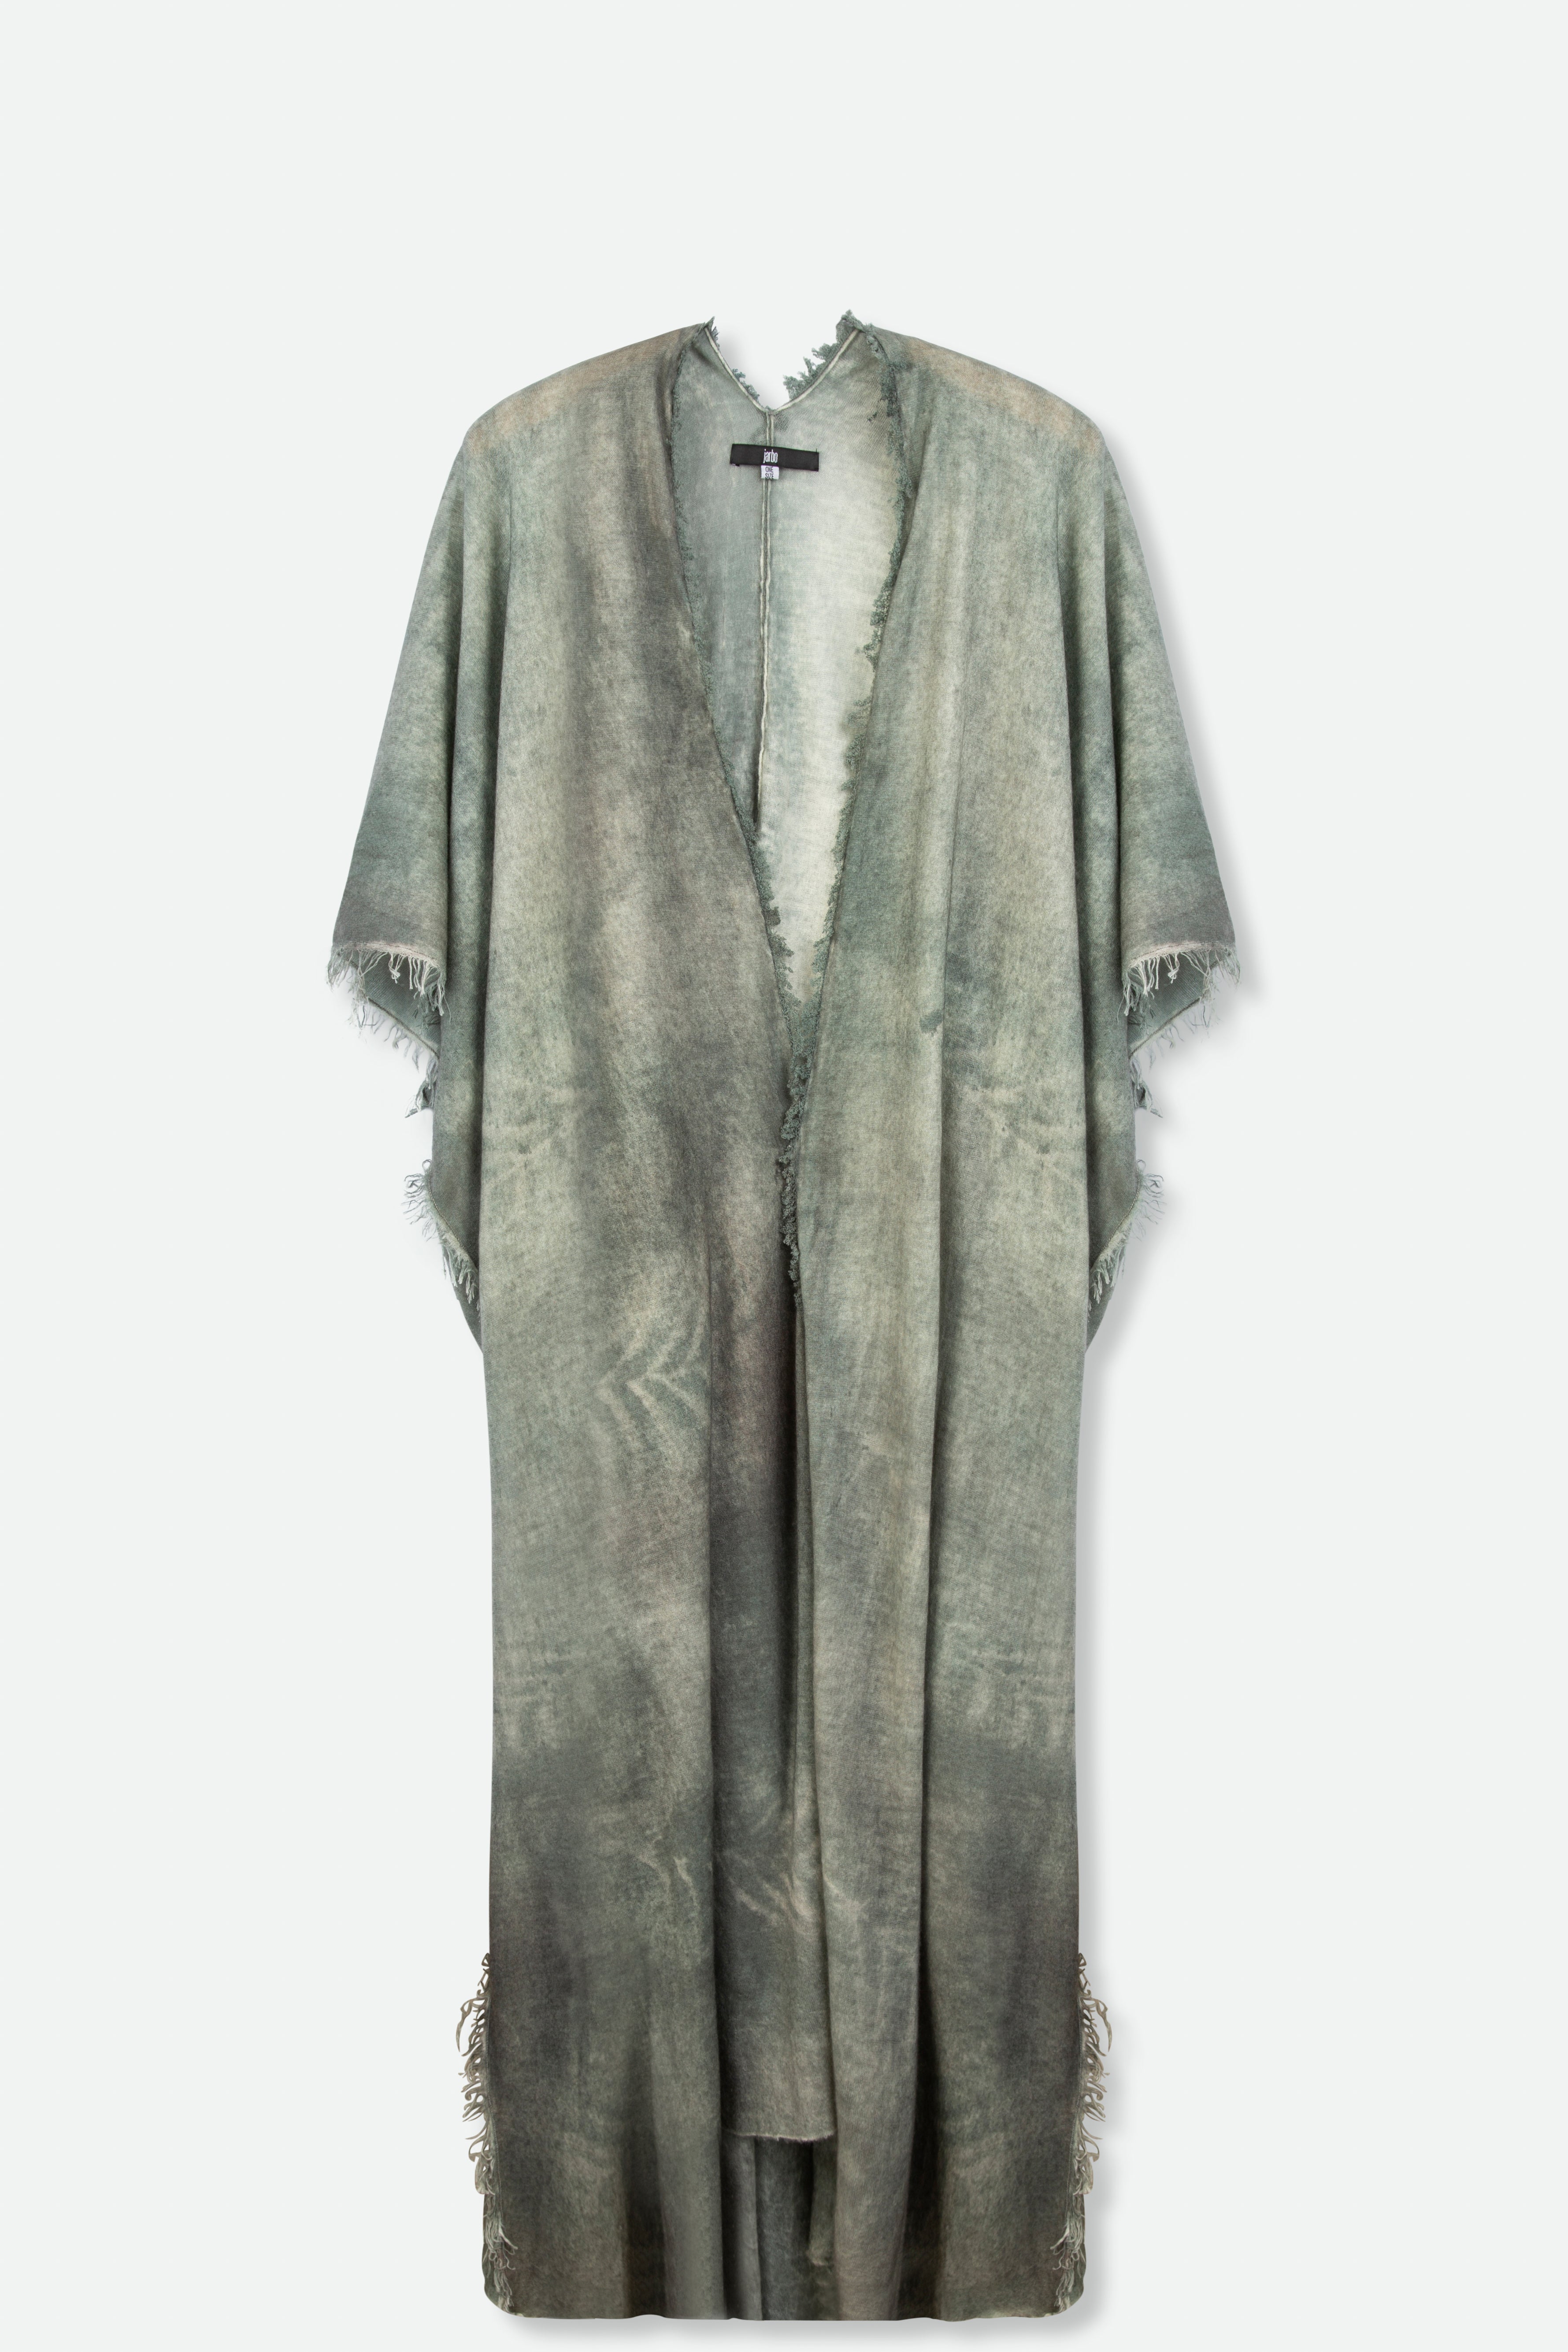 PATNA CARDIGAN IN HAND-DYED CASHMERE SAGE FEATHER